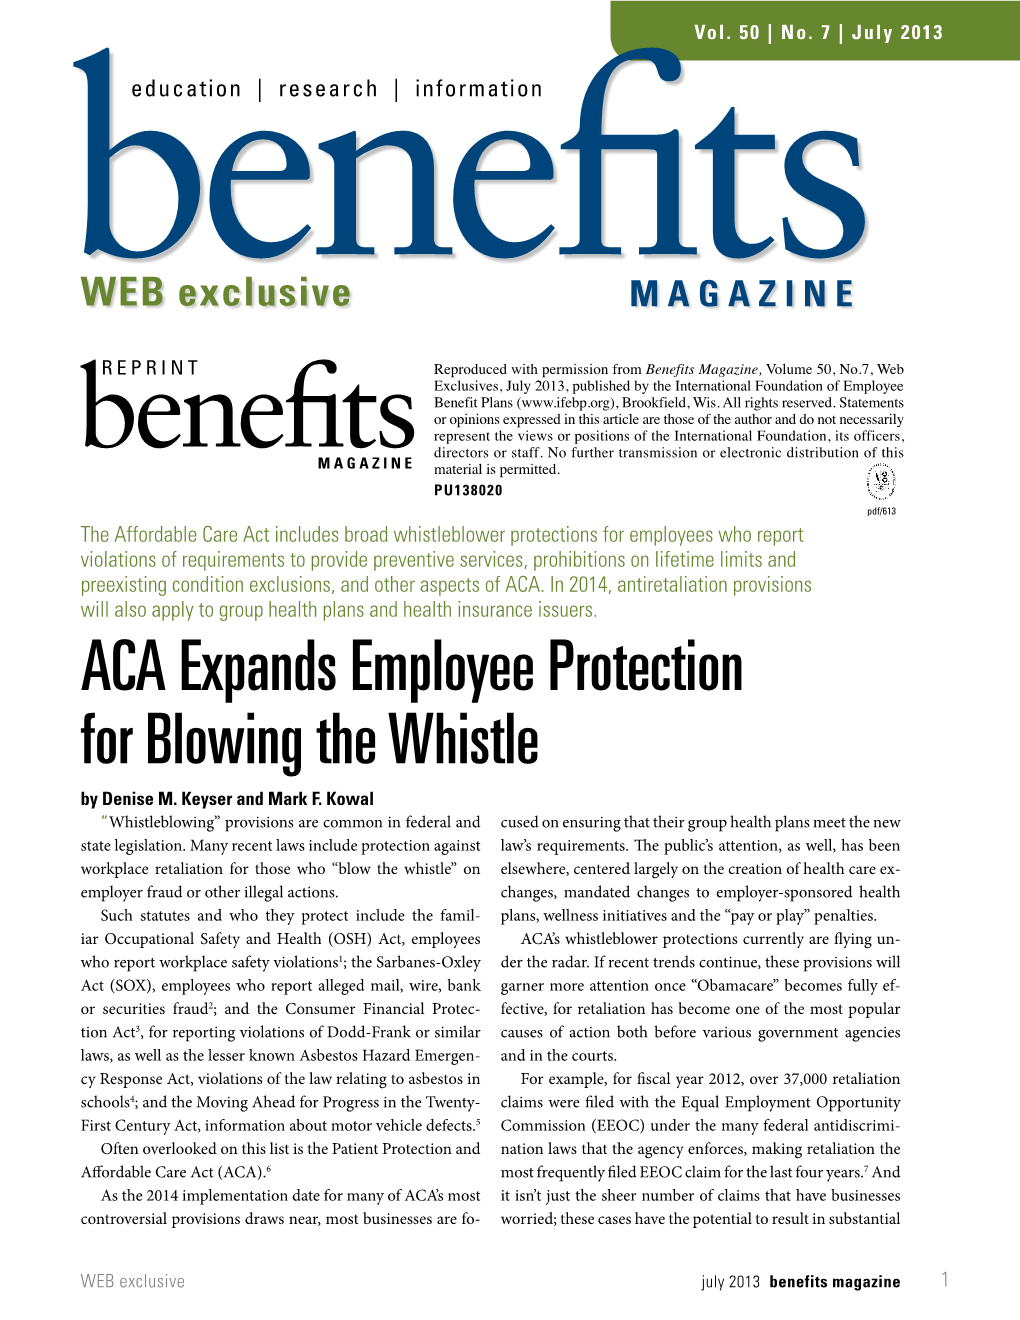 ACA Expands Employee Protection for Blowing the Whistle by Denise M